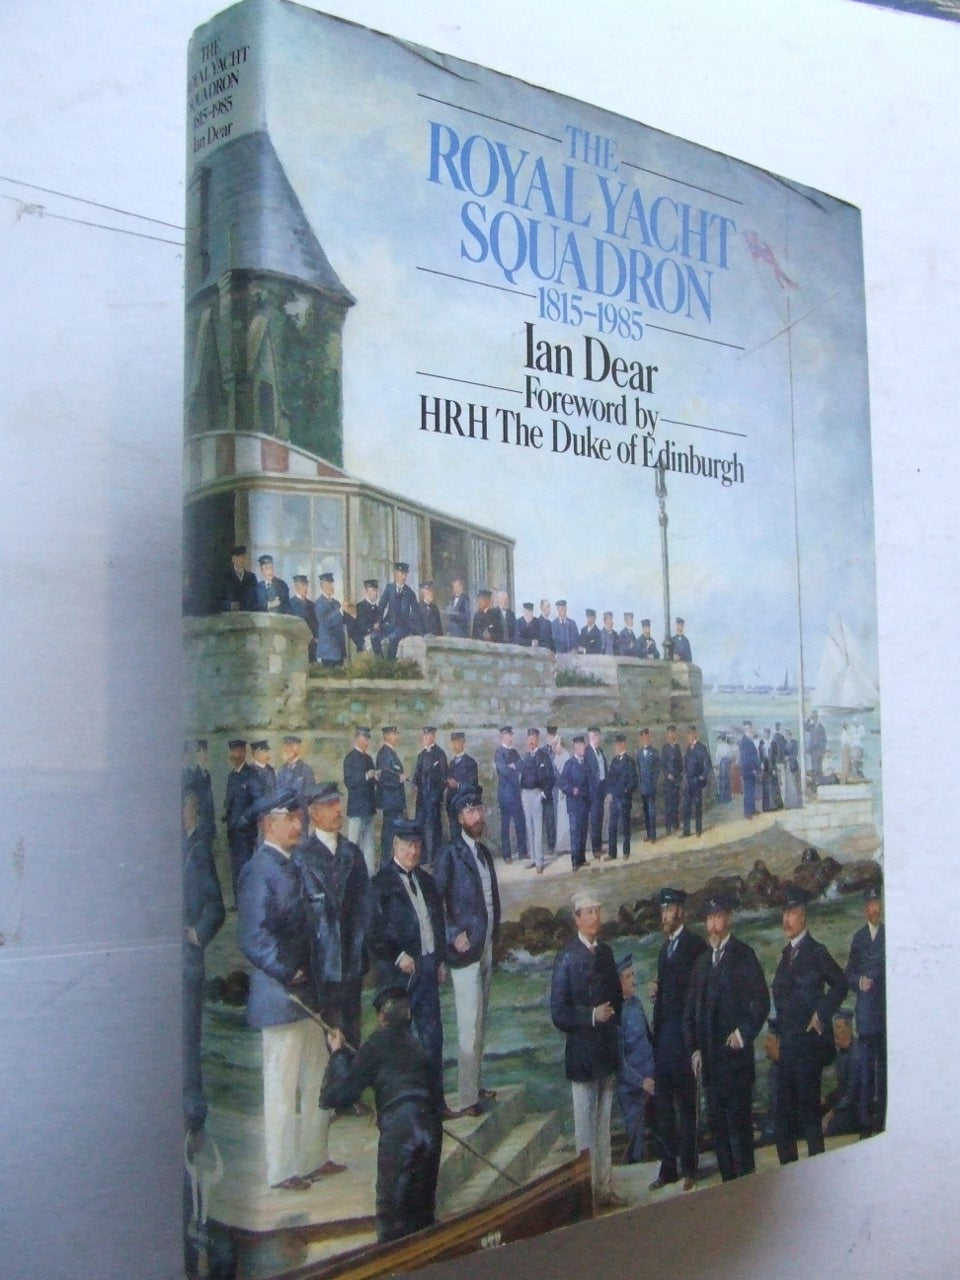 The Royal Yacht Squadron 1815-1985